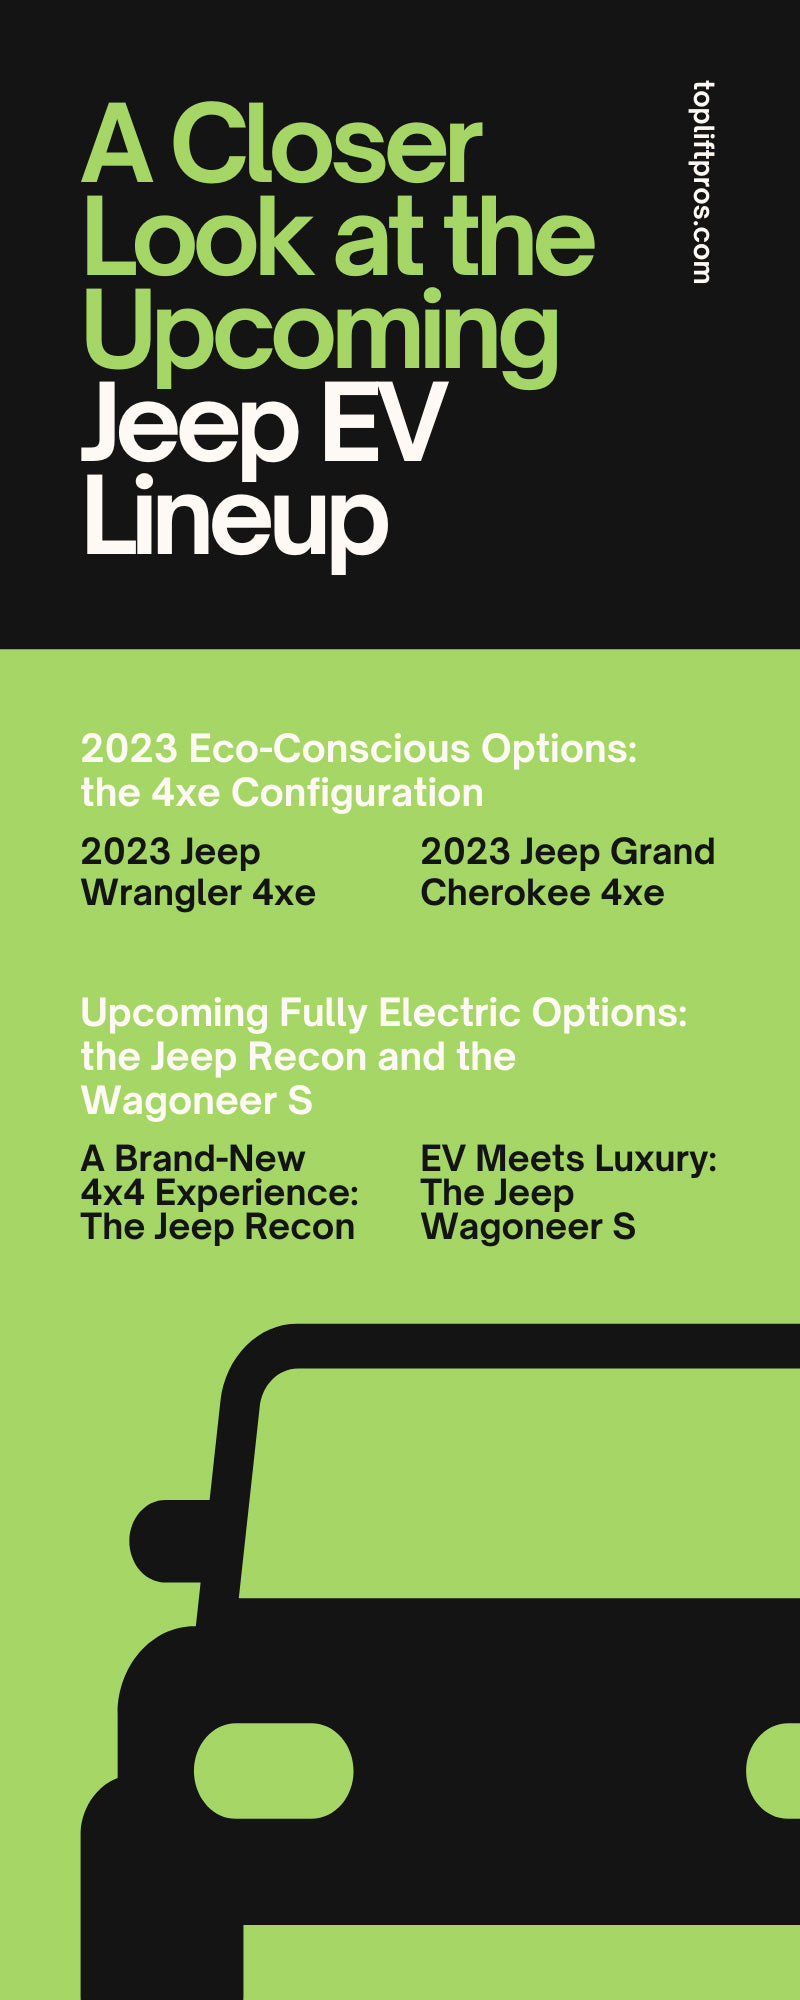 A Closer Look at the Upcoming Jeep EV Lineup